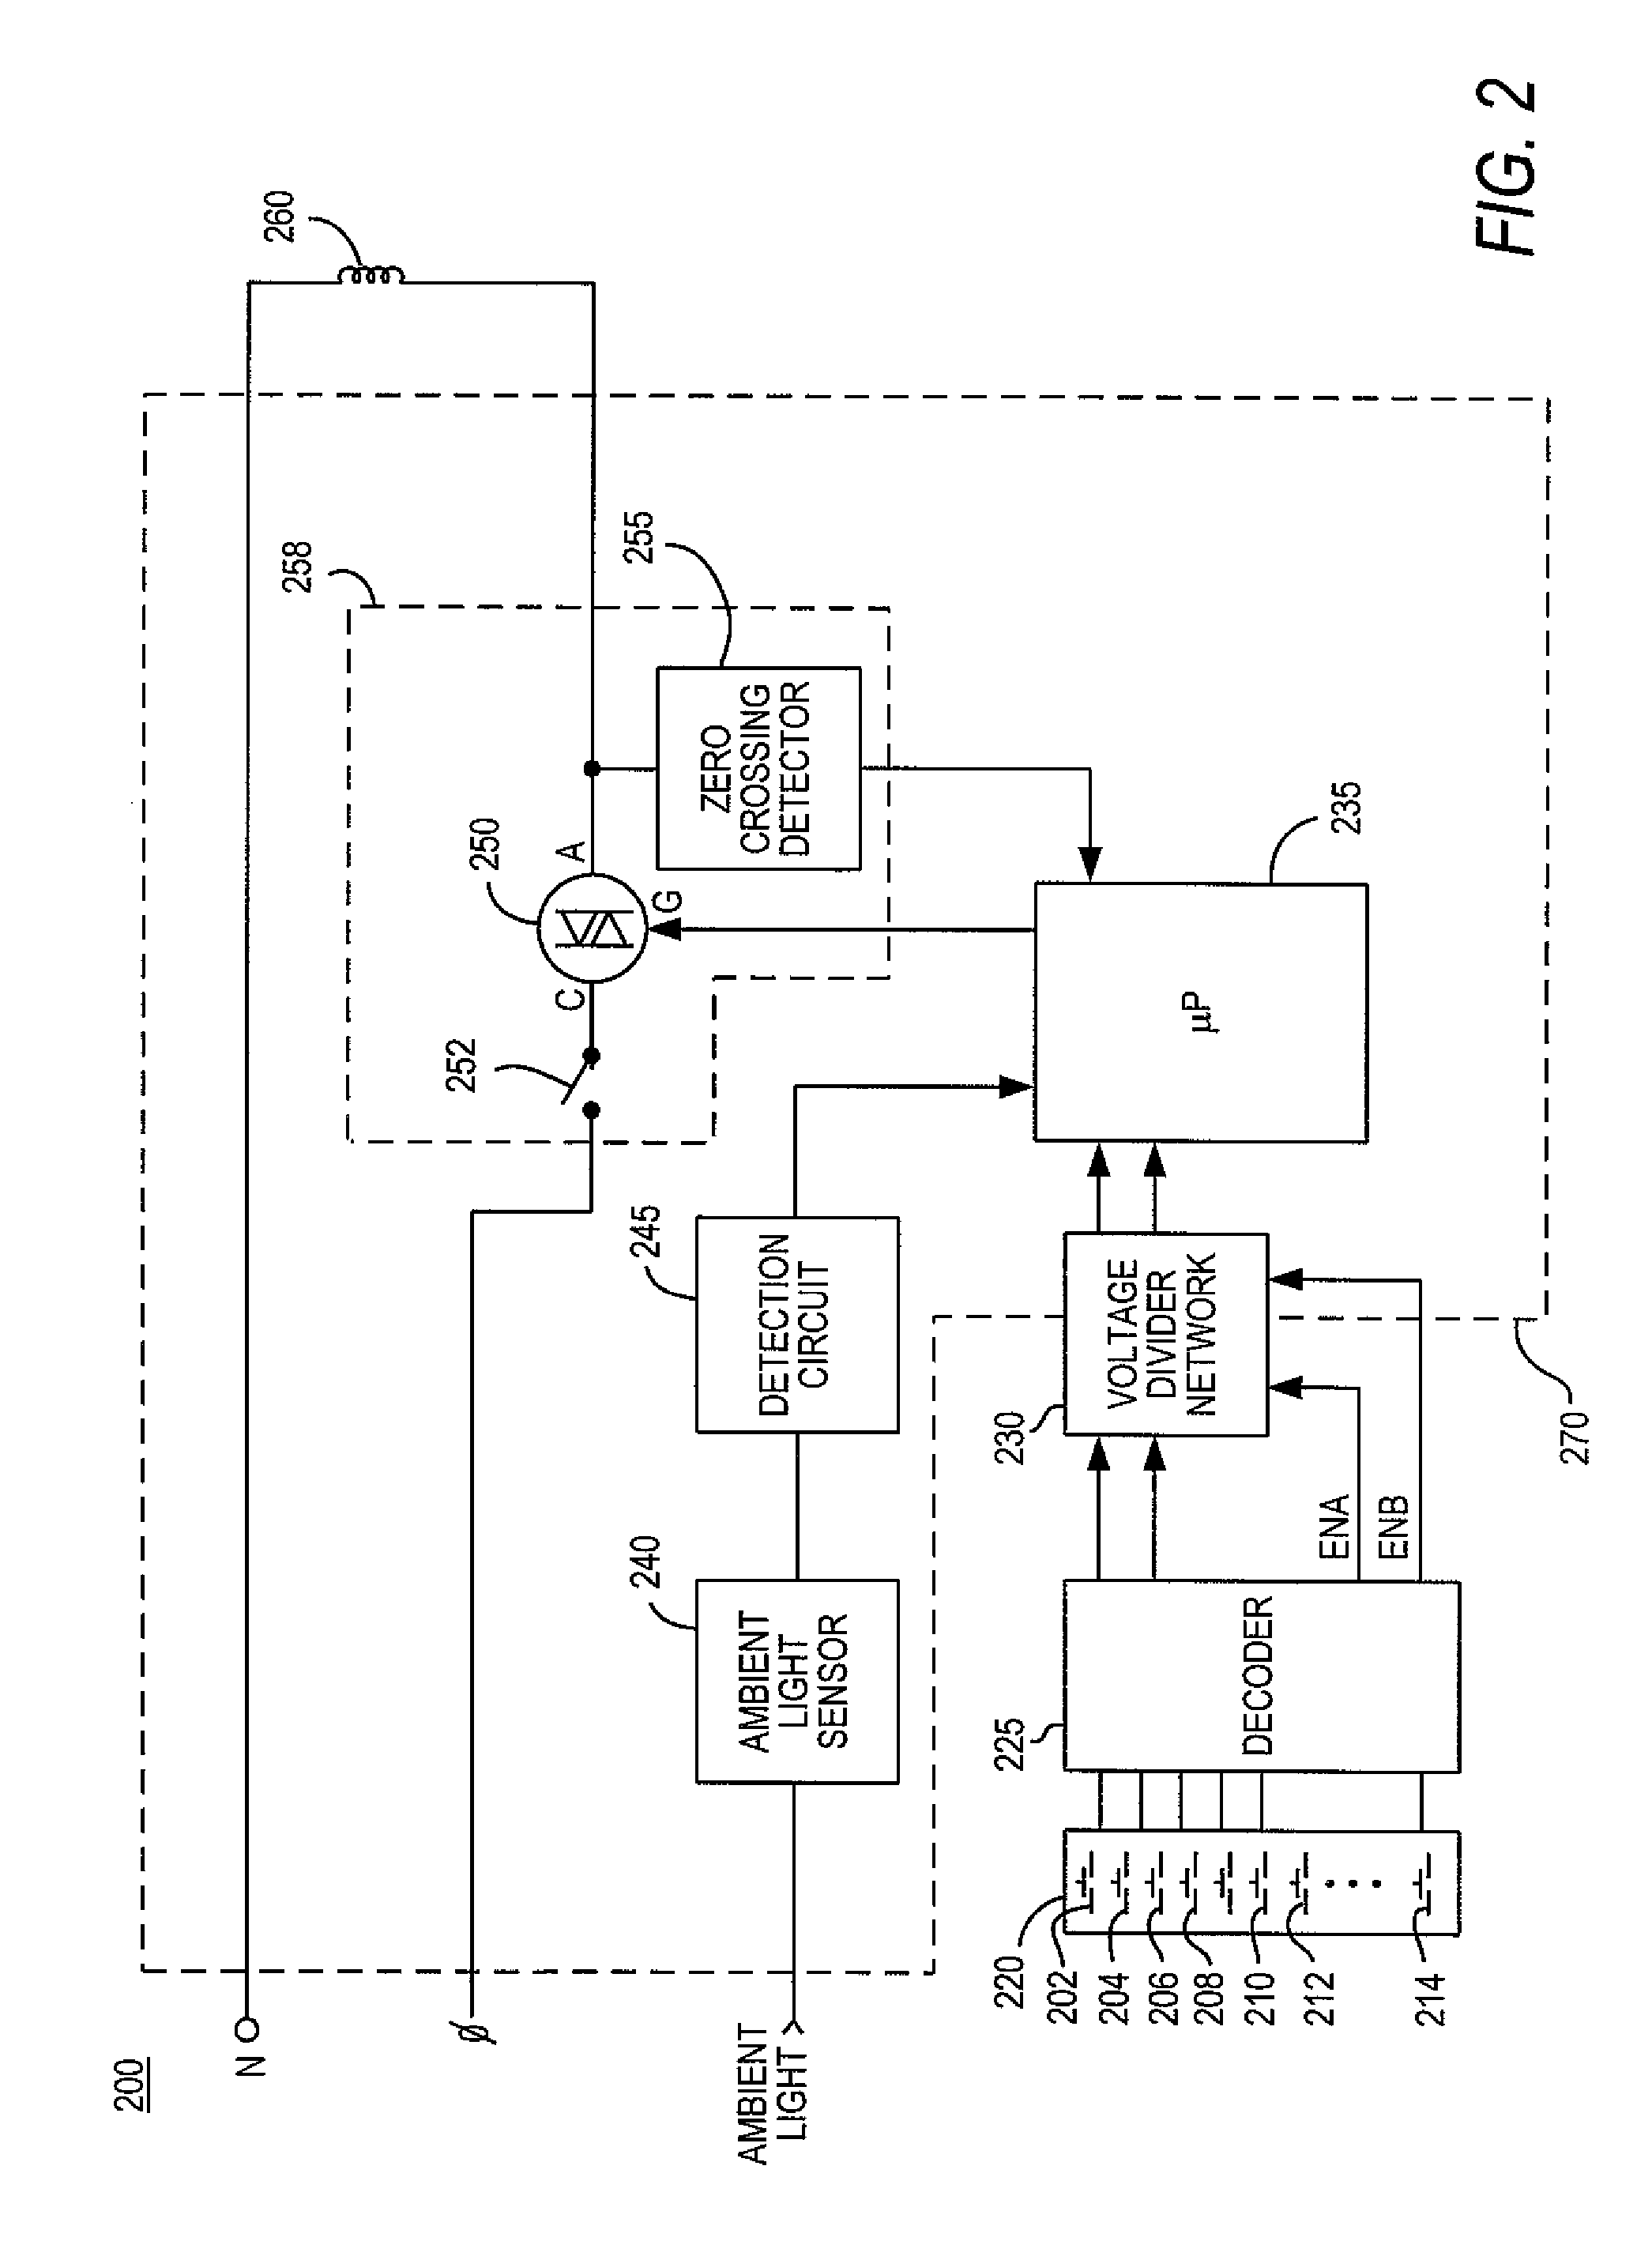 Multi-button low voltage switch adaptable for three states